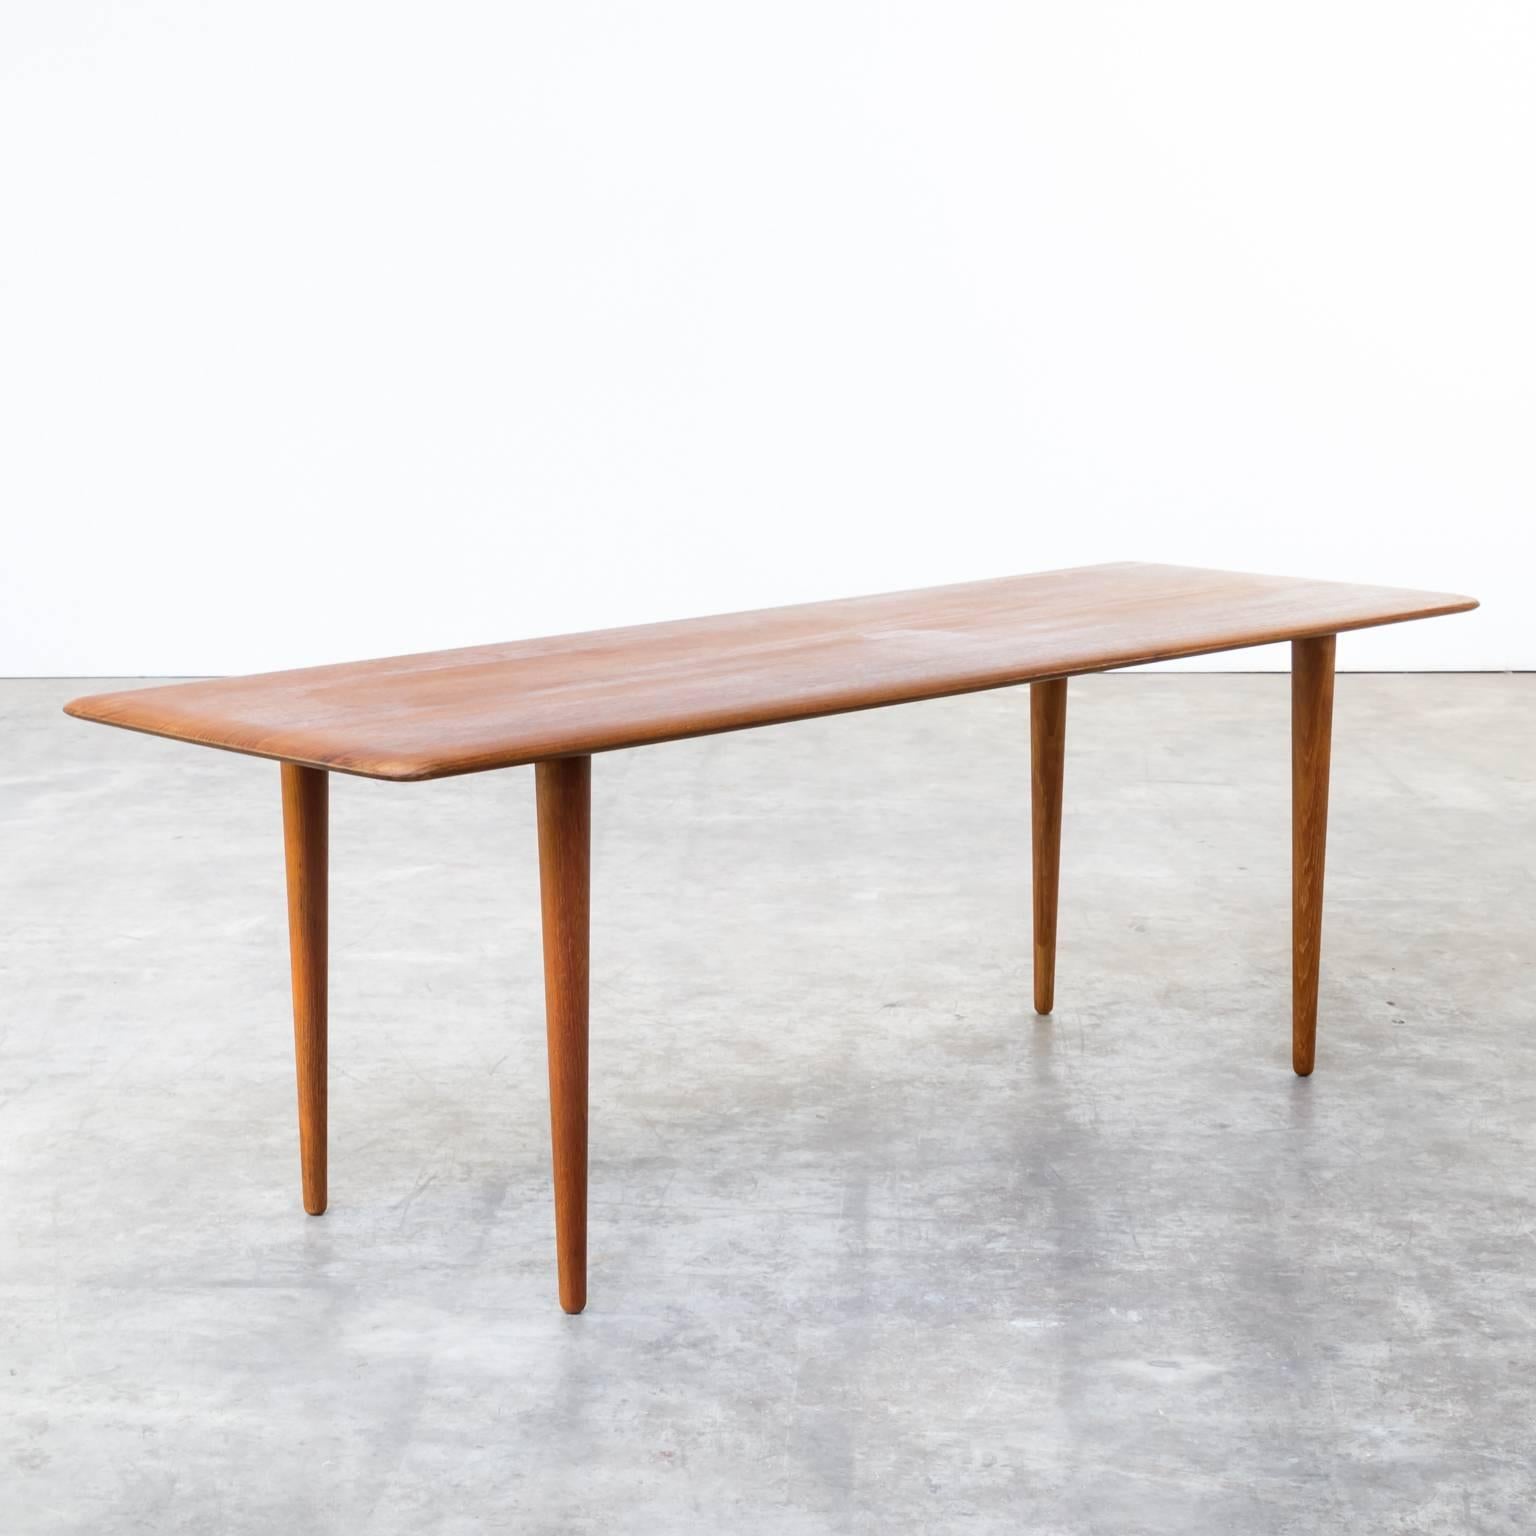 1960s Peter Hvidt FD156 design coffee table for France & Son. Thin lined beautiful shaped table in teak. Very good condition, wear consistent with age and use. Dimensions: 147cm W x 49cm D x 49cm H.